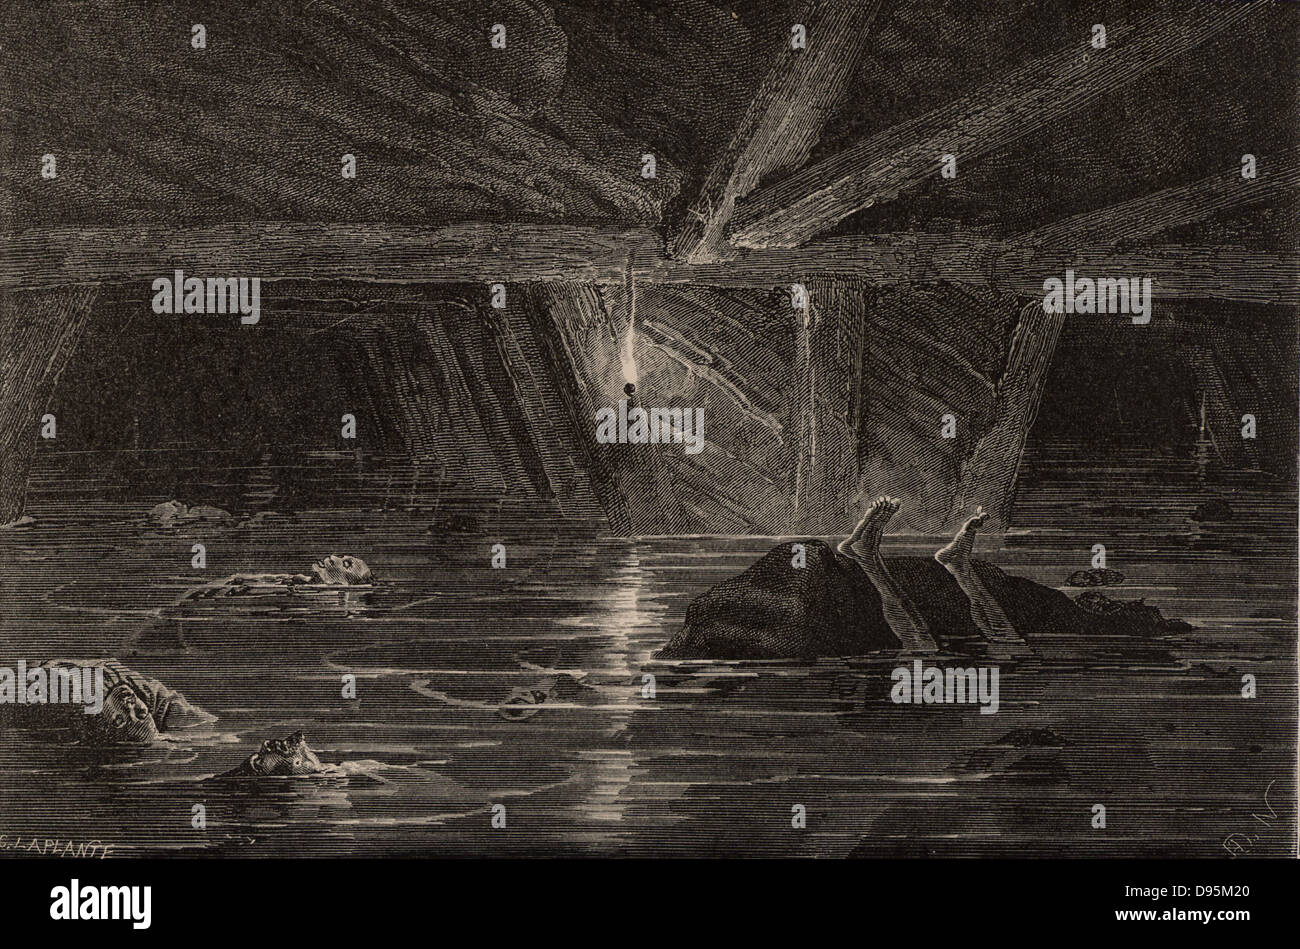 Inundation in a mine. Flooded mine workings with bodies of miners drowned in the disaster.  From  'Underground Life; or, Mines and Miners' by Louis Simonin (London, 1869). Wood engraving. Stock Photo